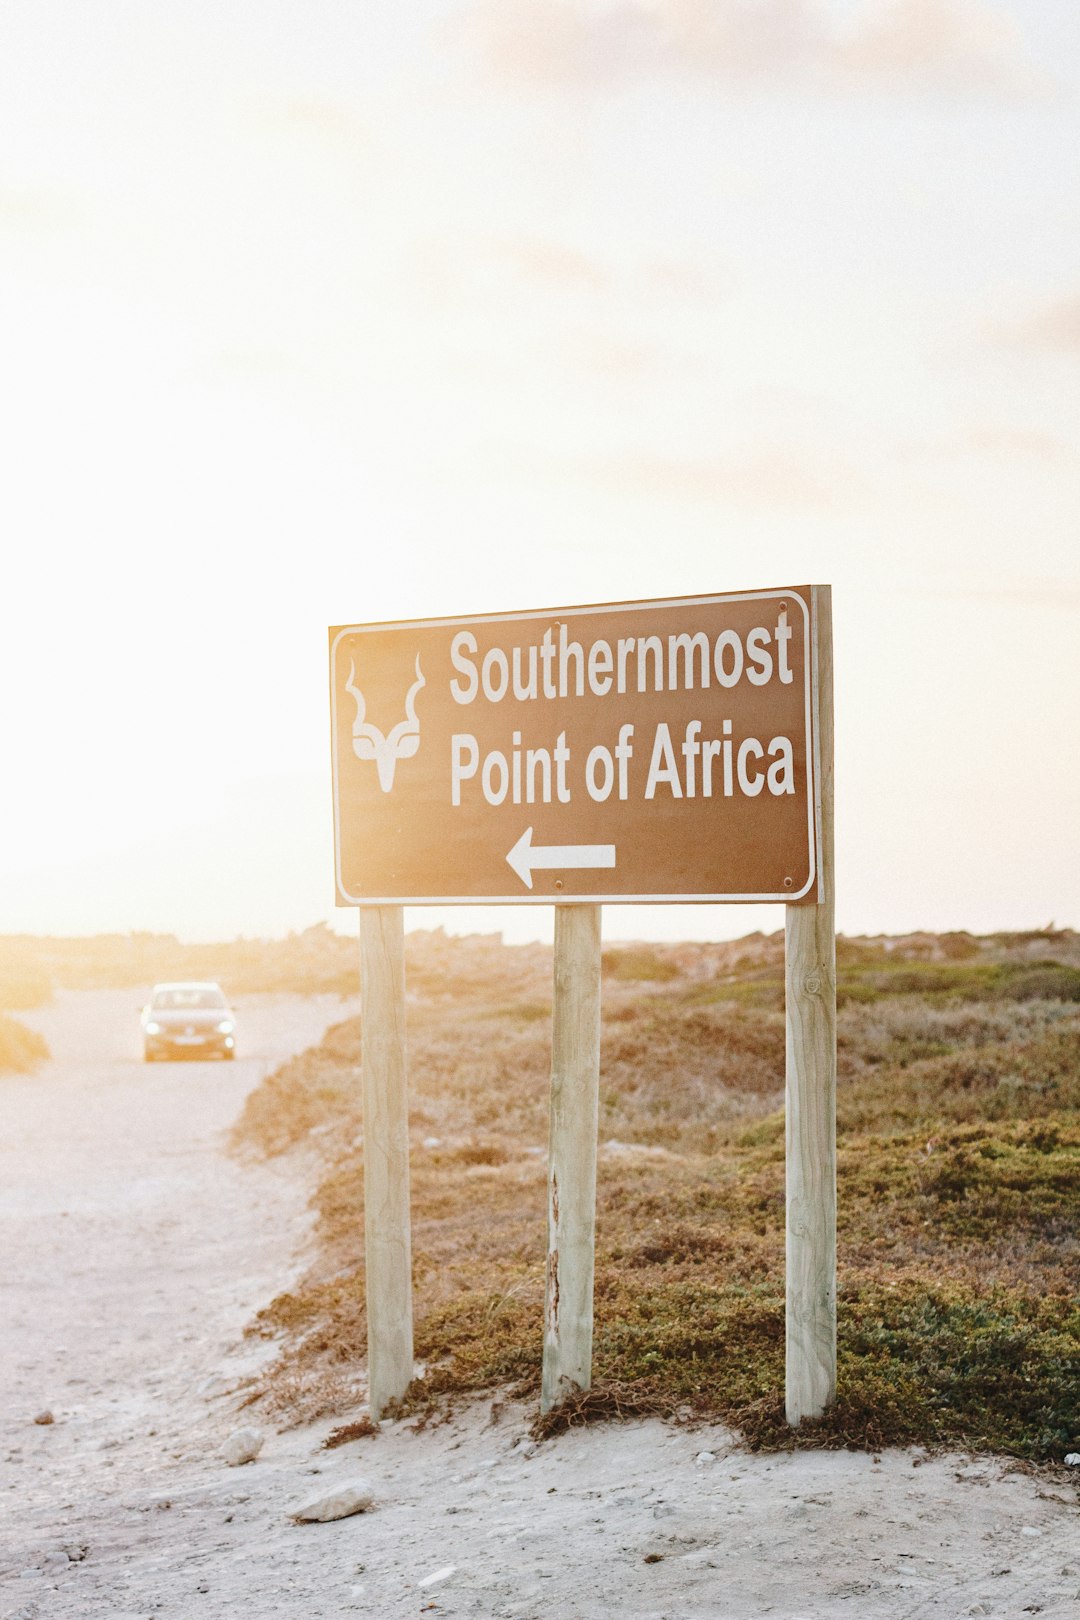 travelers stories about Beach in L'Agulhas, South Africa